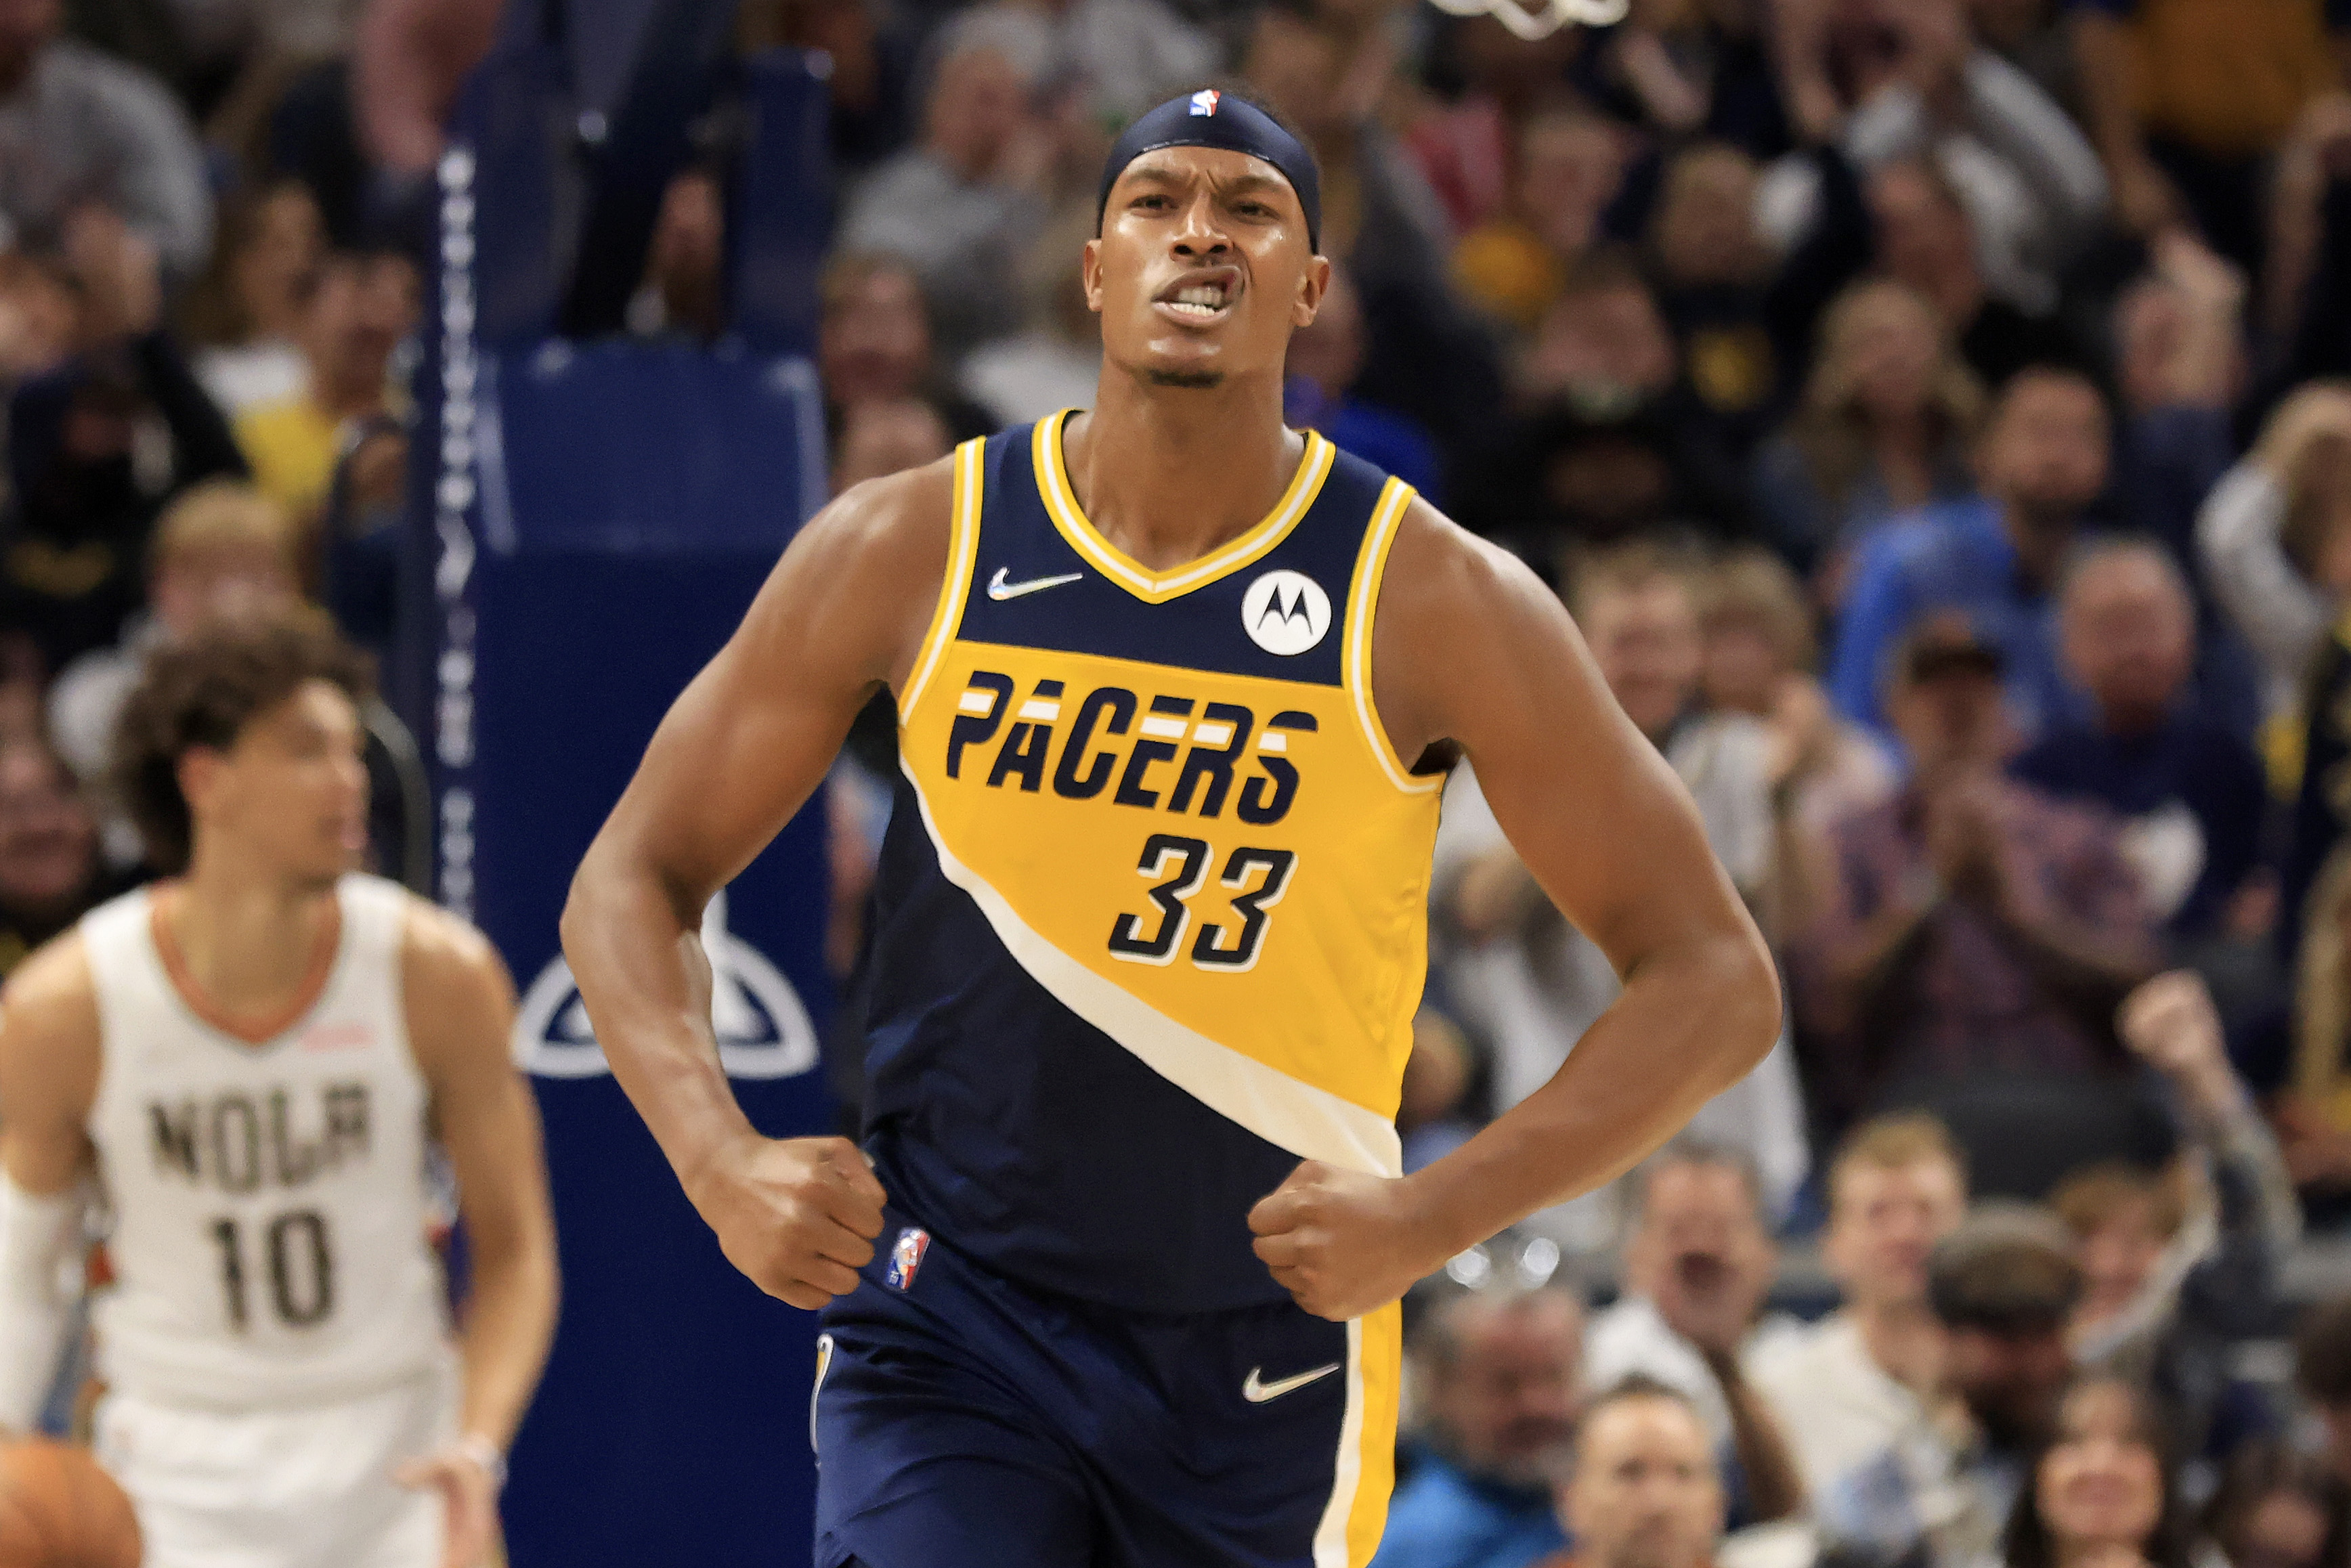 Myles Turner #33 of the Indiana Pacers reacts after a dunk in the game against the New Orleans Pelicans during the third quarter at Gainbridge Fieldhouse on November 20, 2021 in Indianapolis, Indiana.